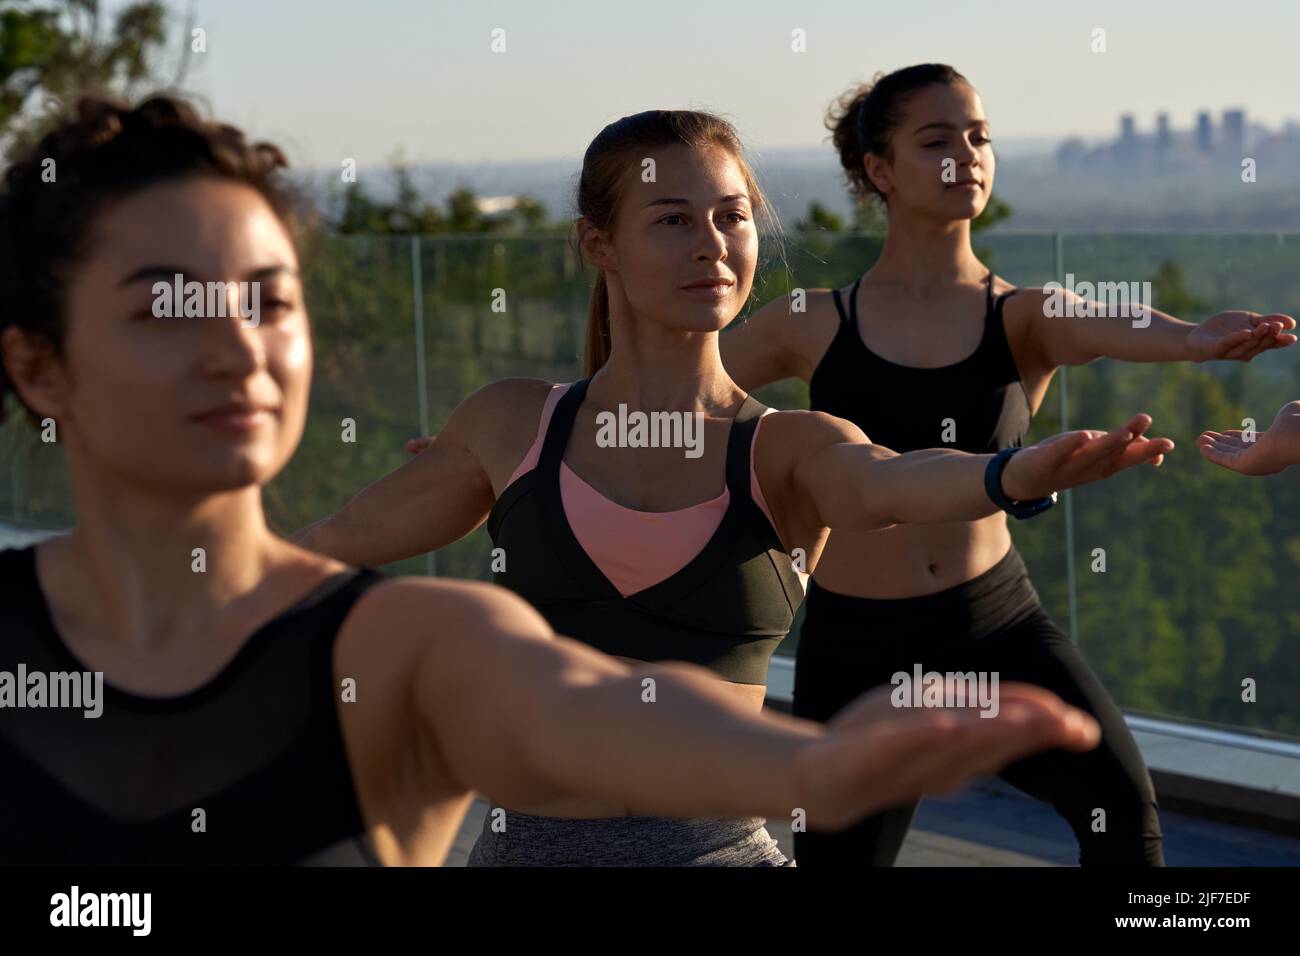 Fit healthy sporty women stand in yoga warrior pose at group class outdoor. Stock Photo